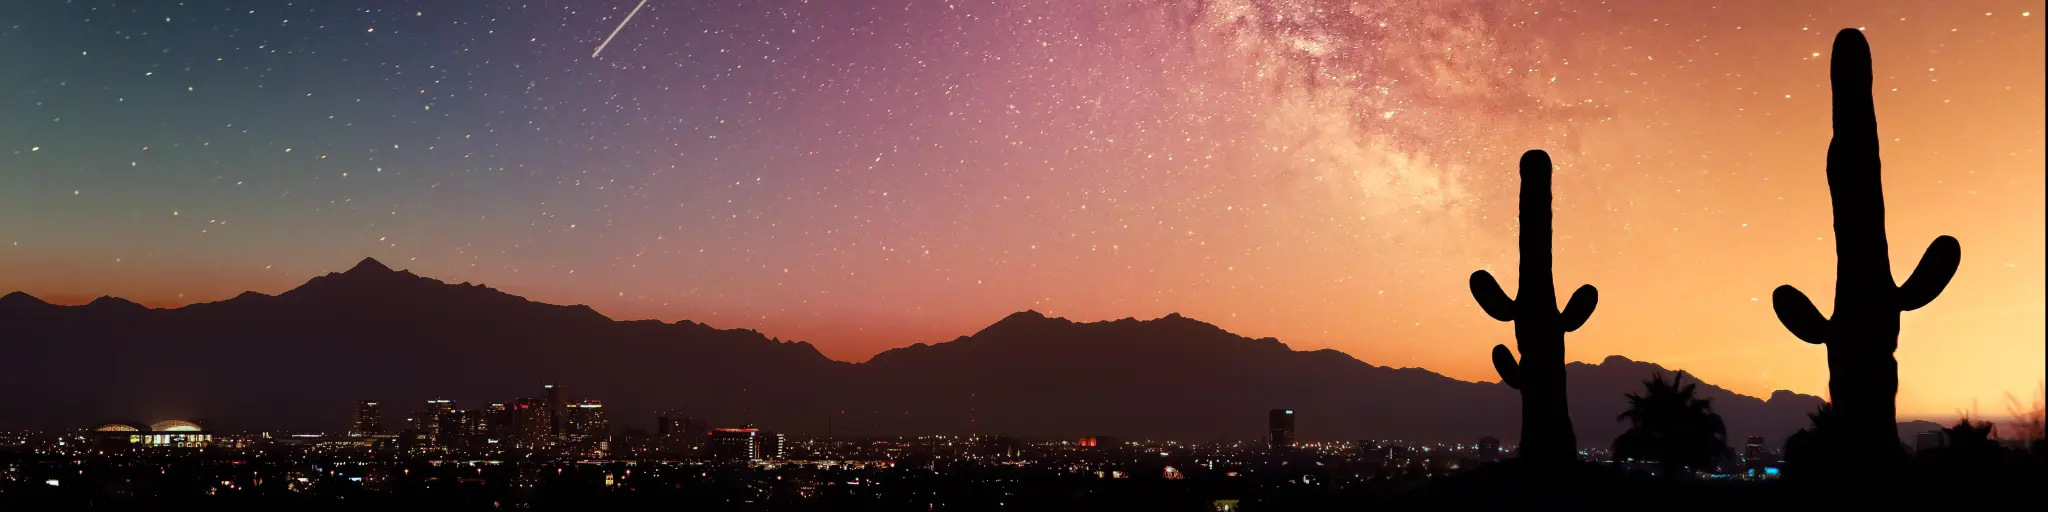 A starry sky with the Milky Way visible over the city of Phoenix, Arizona, with cacti in the foreground 